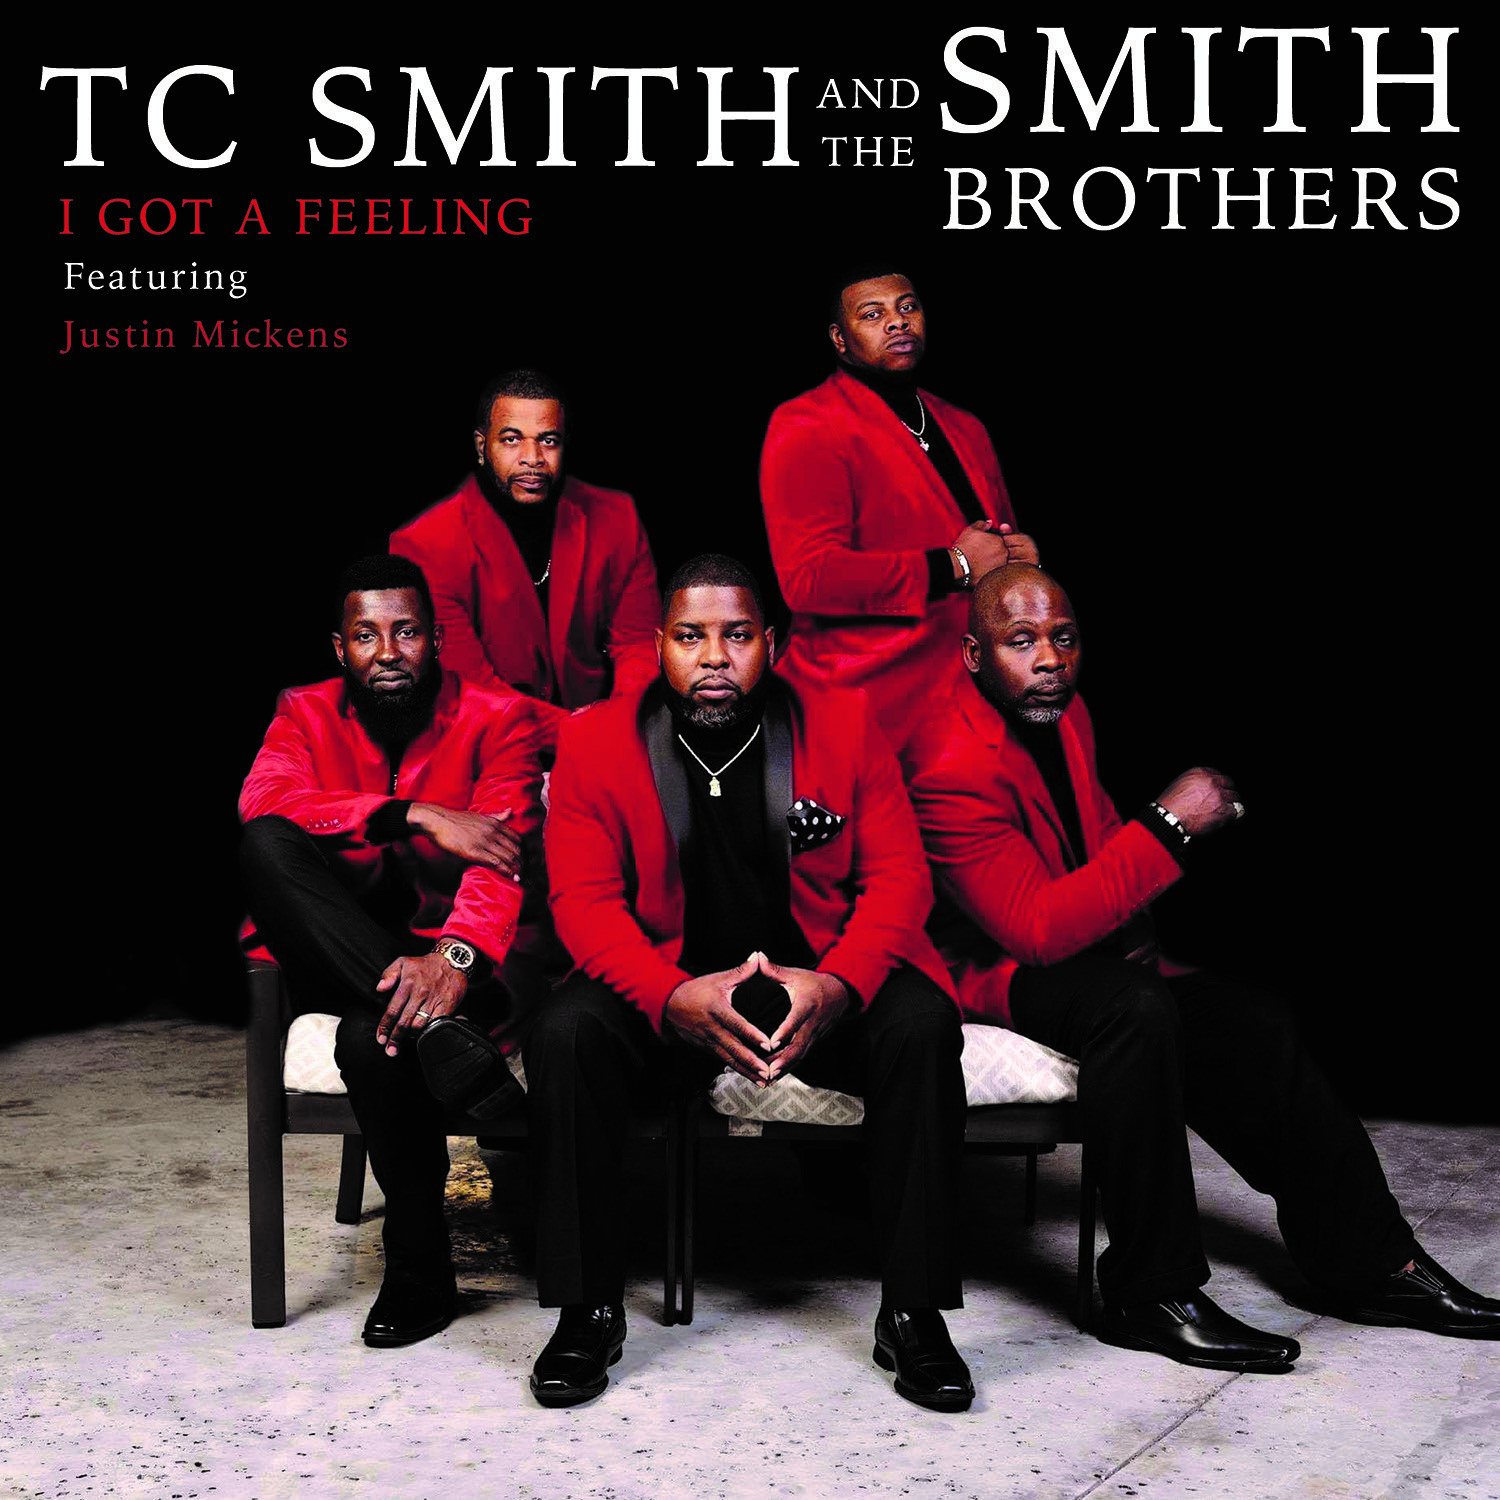 TC Smith & The Smith Brothers - I Got A Feeling (Featuring Justin Mickens)